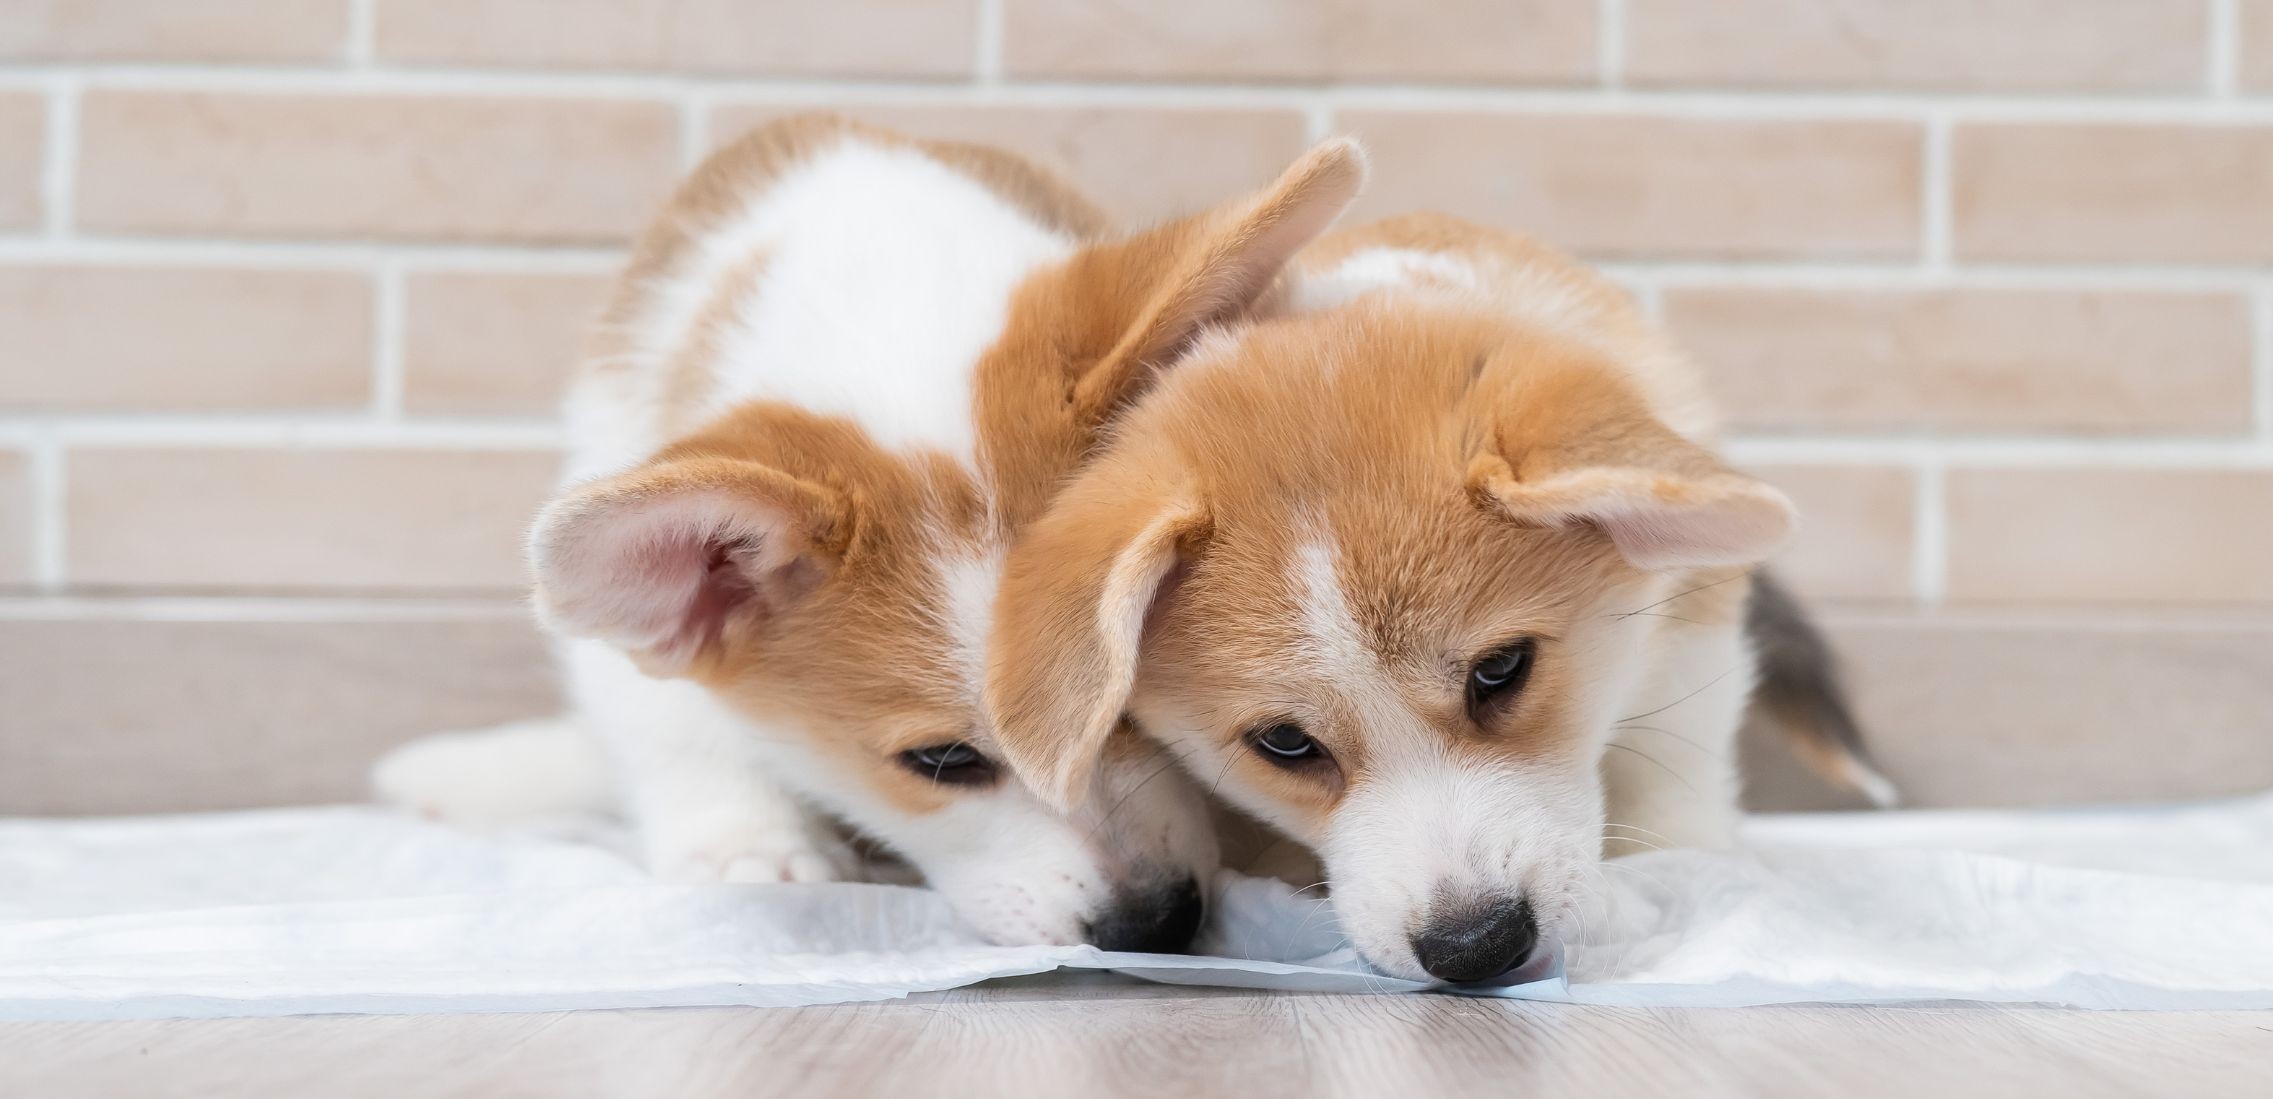 Two corgi puppies chewing disposable pee pad